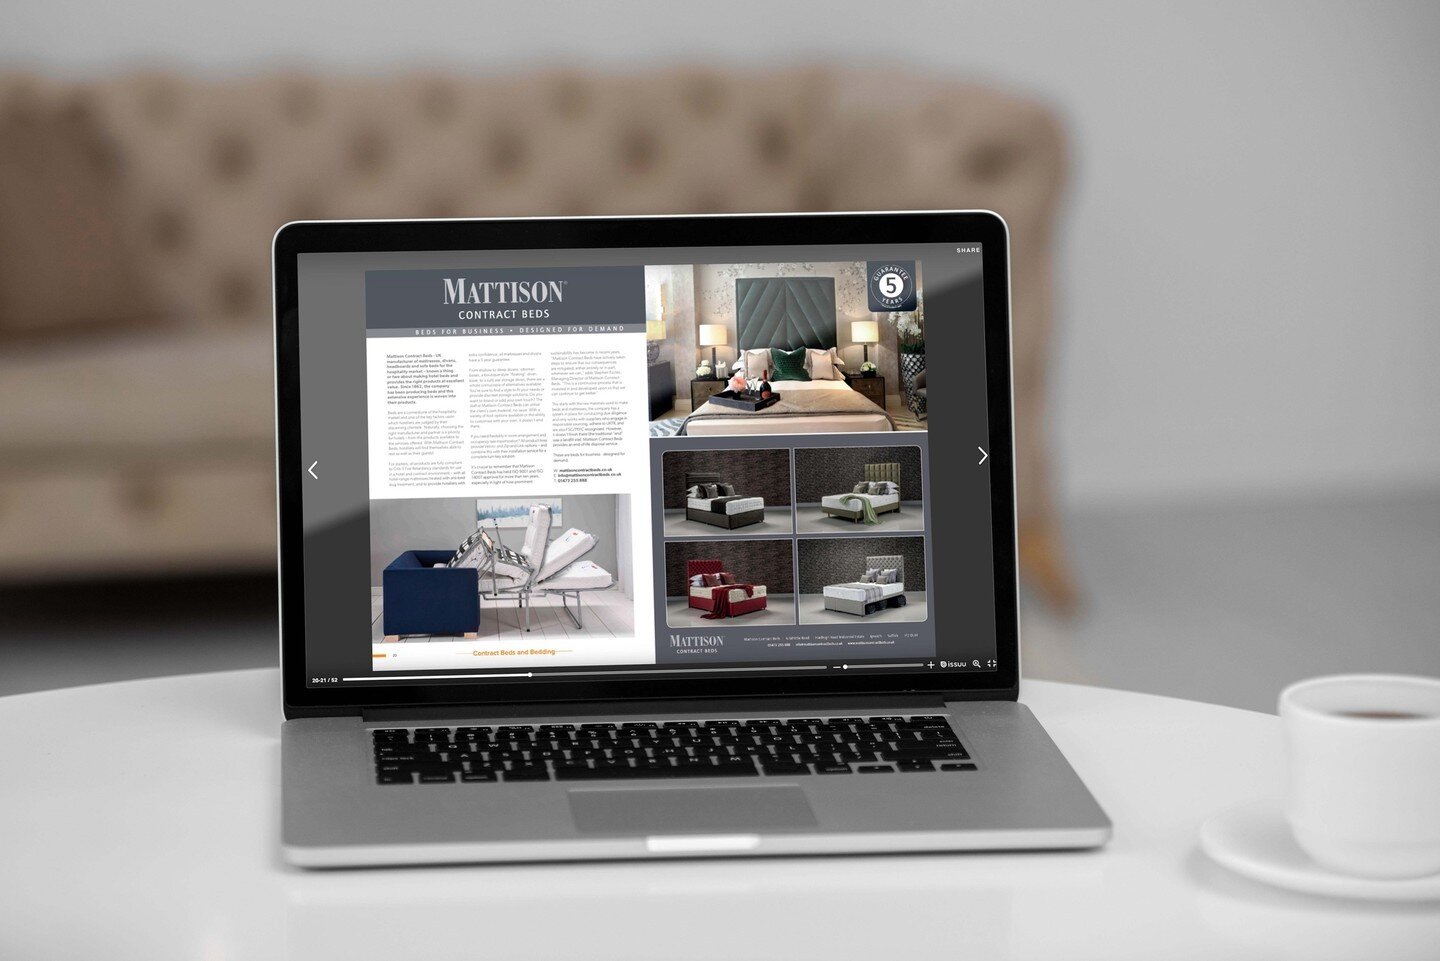 Mattison Contract Beds 🛏⁠
⁠
UK manufacturer of mattresses, divans, headboards and sofa beds for the hospitality market &ndash; knows a thing or two about making hotel beds and provides the right products at excellent value. ⁠
⁠
See the full article 